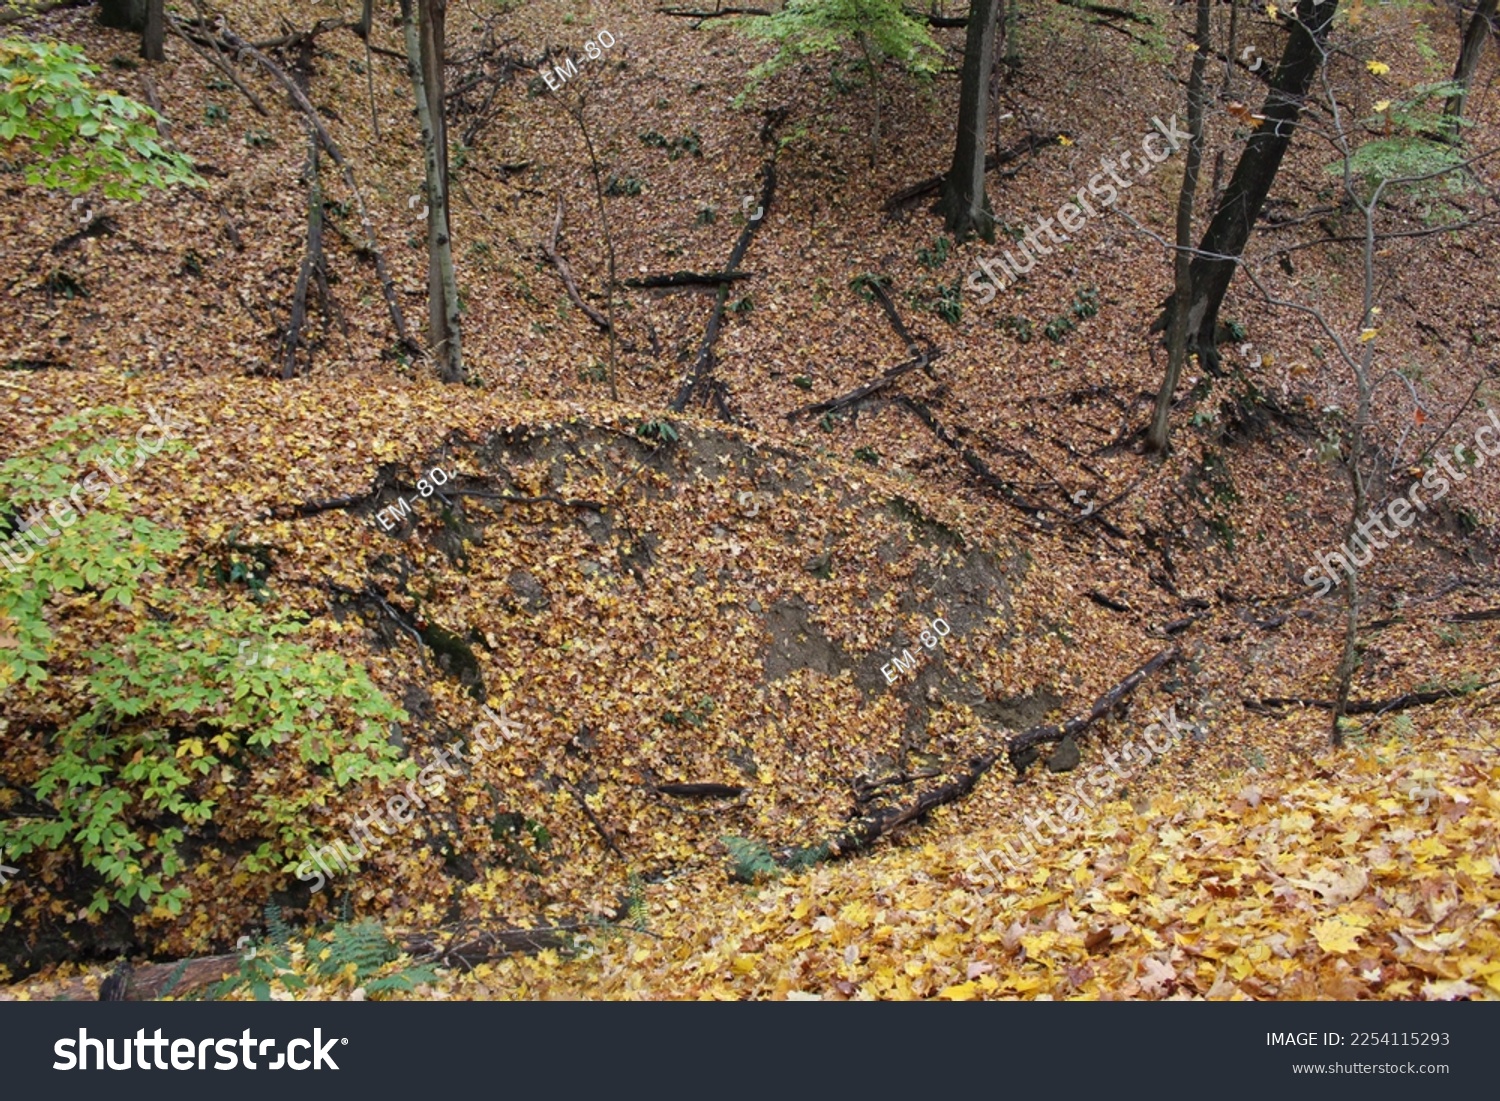 In a forested, leaf-covered area, the confluence of 2 small streams has resulted in a sharp point of land, which has suffered a recent landslide and bears a visible scarp scar.    #2254115293